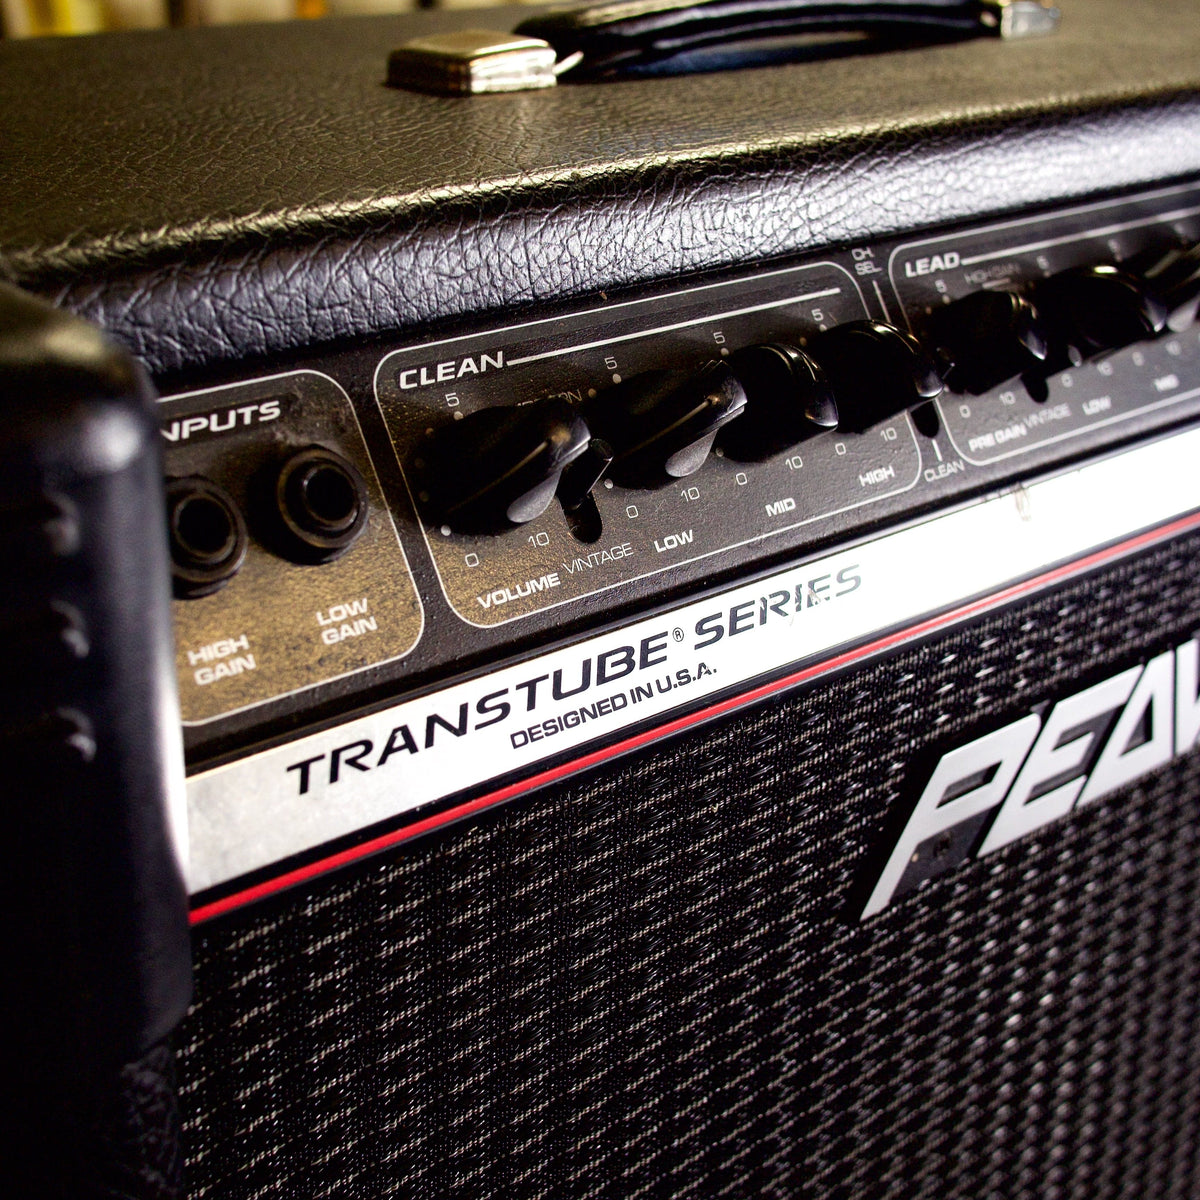 PEAVEY Home Page USED PEAVEY BANDIT/100W GUITAR AMP - Byron Music